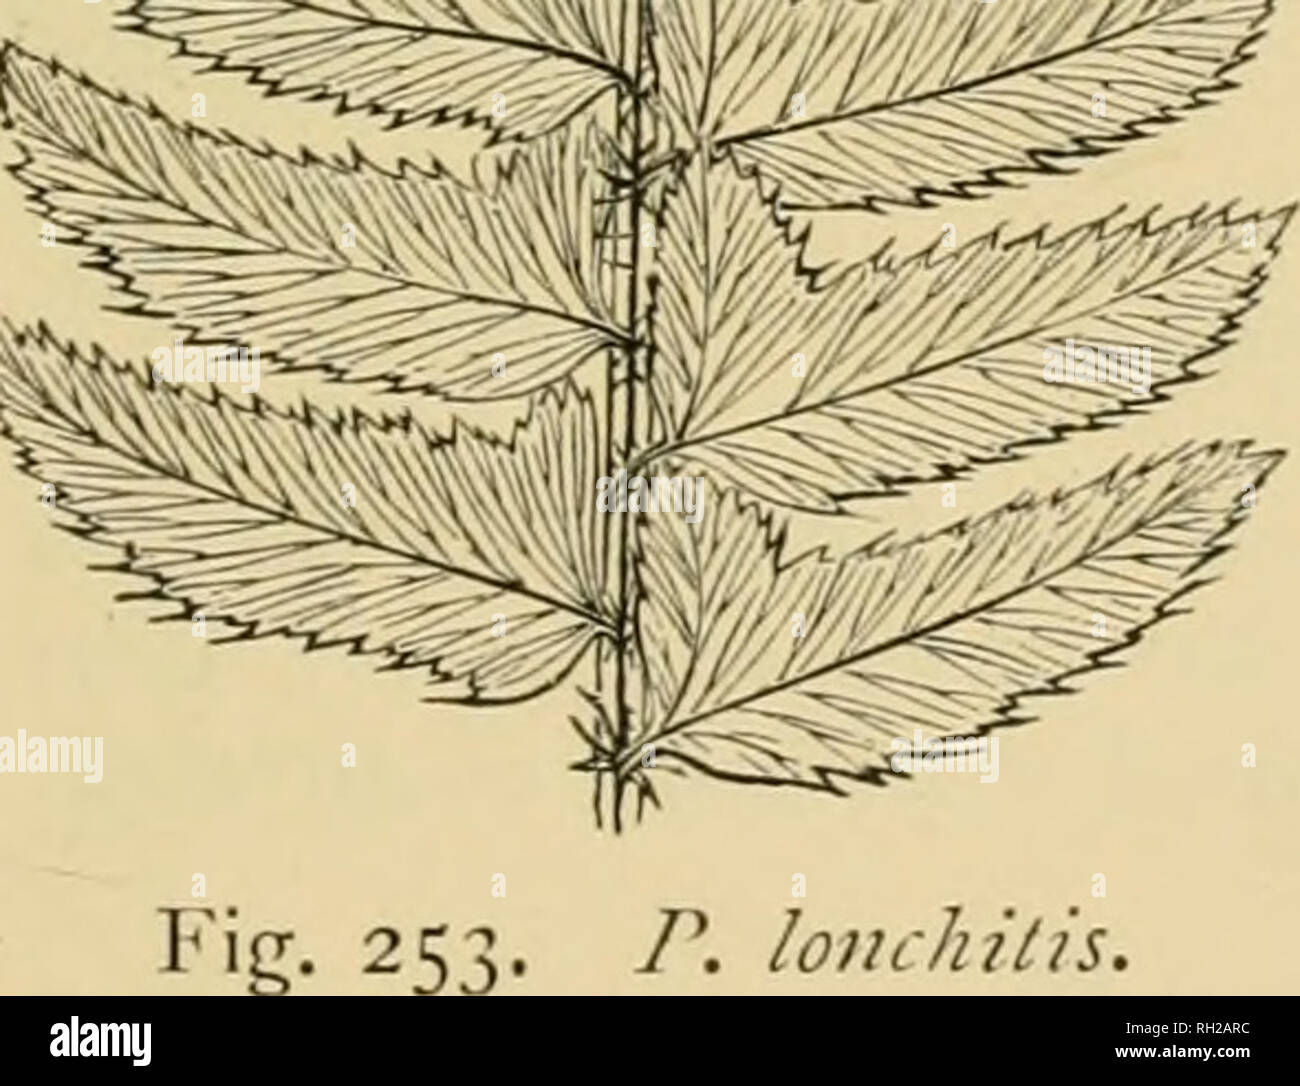 . British ferns and their varieties. Ferns. TIIK roLYh^TlcnUMS 217 Wakelevanum (cruciatum).—Found in S. Devon by Mrs. Wakeley ; pinnse set on in pairs at right-angles, forming crosses with opposite pairs ; one of the parents of Mr. E. J. Lowe's hyhridiim aculeatiim. POLYSTICHUM LONCHITIS (ThE HoLLY FeRN) (Plate XXXII) This Fern has been named the Holly Fern, owing to the hard, leathery texture of its fronds, and the shape and prickly edges of the pinucc or subdivisions. It is purely a mountain Fern, and in Great Britain is never found wild at a lower elevation than iioo feet, most of its habit Stock Photo